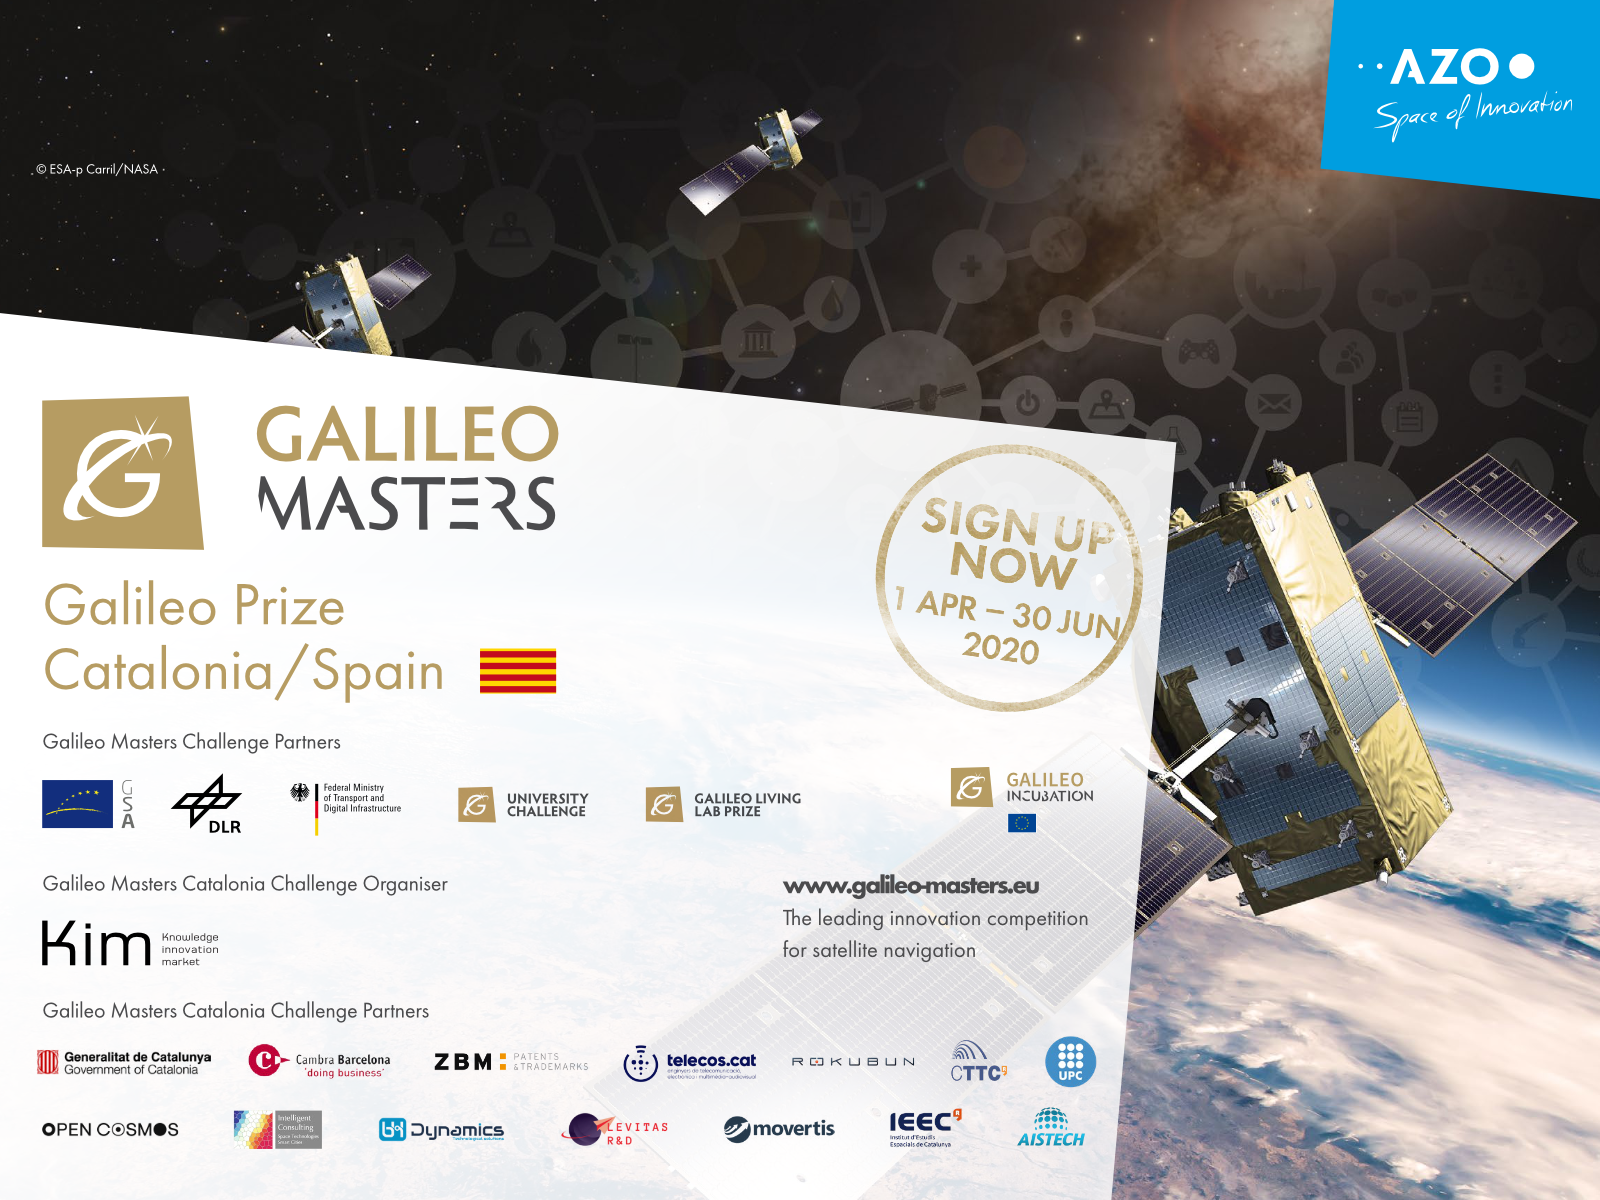 IEEC becomes a Galileo Masters 2020 regional partner providing technological mentoring